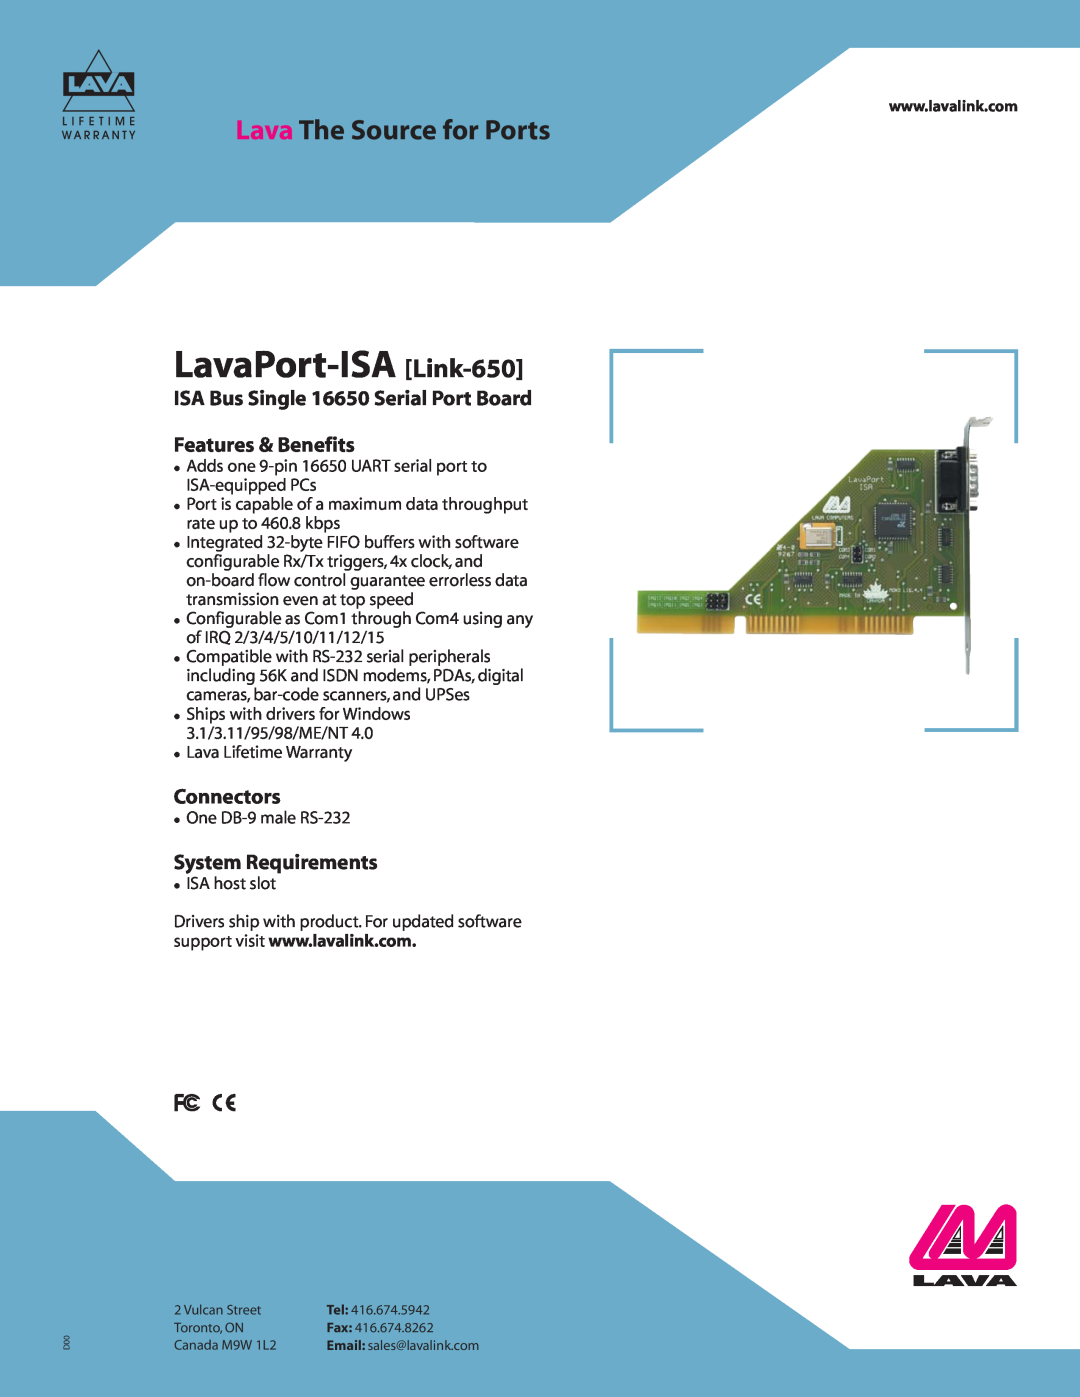 Lava Computer 16650 warranty LavaPort-ISA Link-650, Lava The Source for Ports, Connectors, System Requirements 